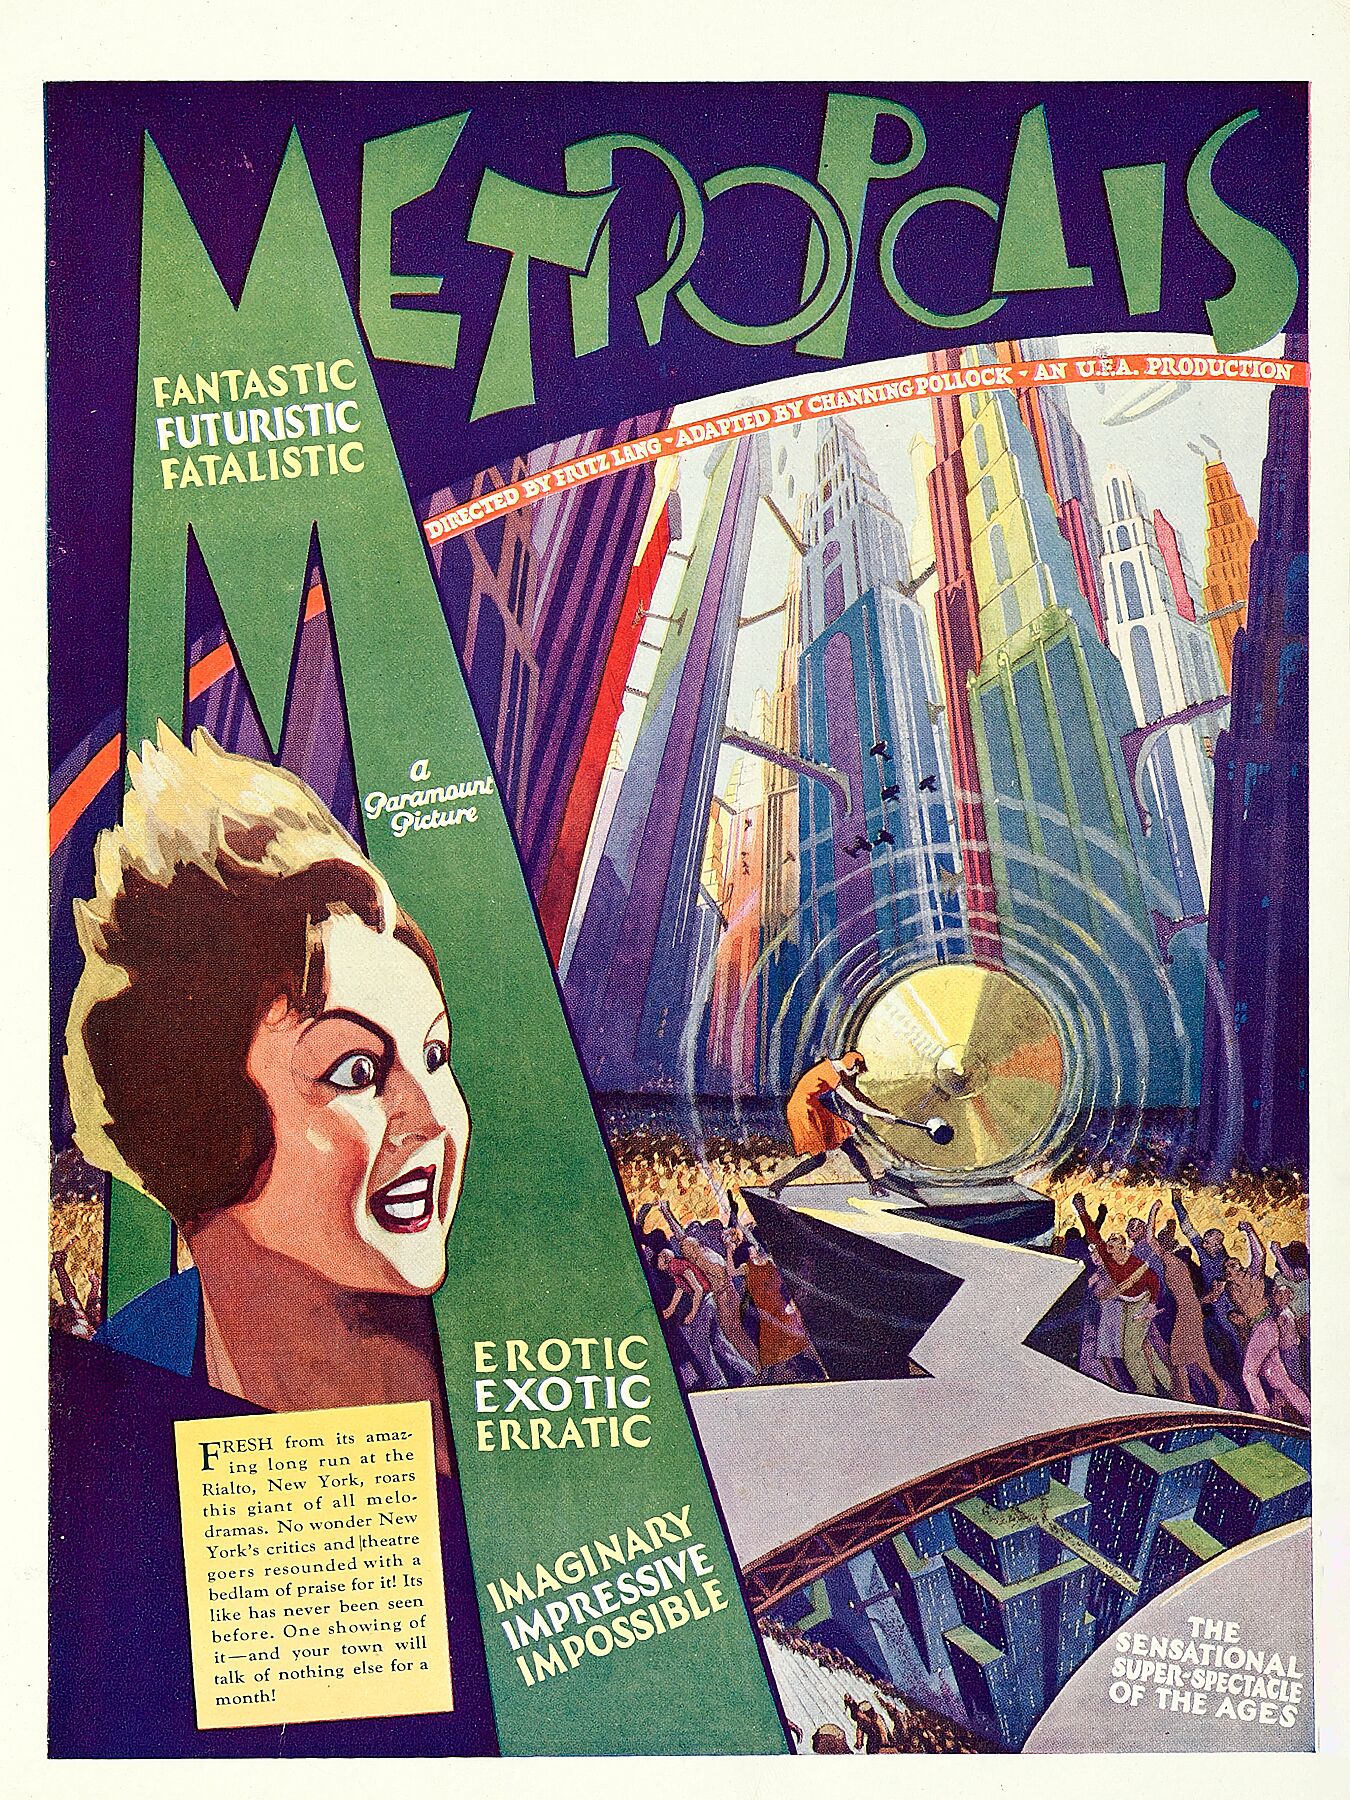 Metropolis is a 1927 German expressionist science-fiction drama film directed by Fritz Lang ... while Paramount's original US release said the film takes place in 3000.